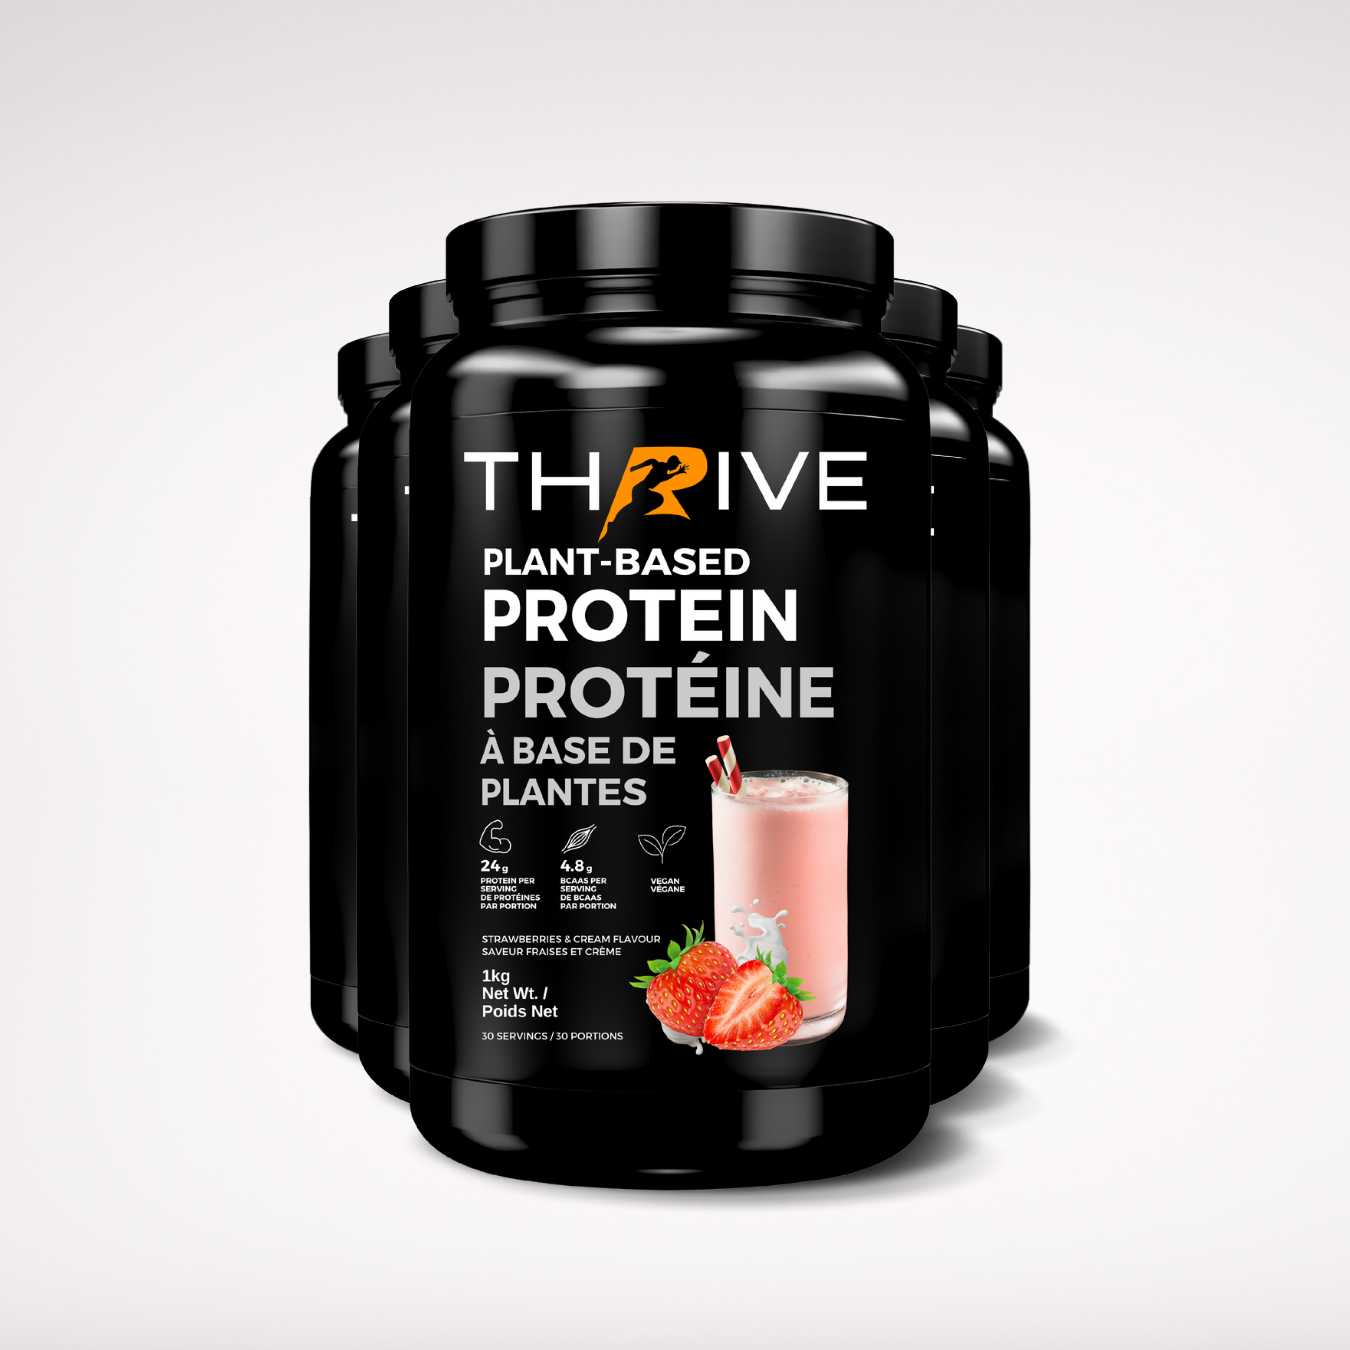 Thrive Plant-Based Protein Strawberries & Cream (5 Units)